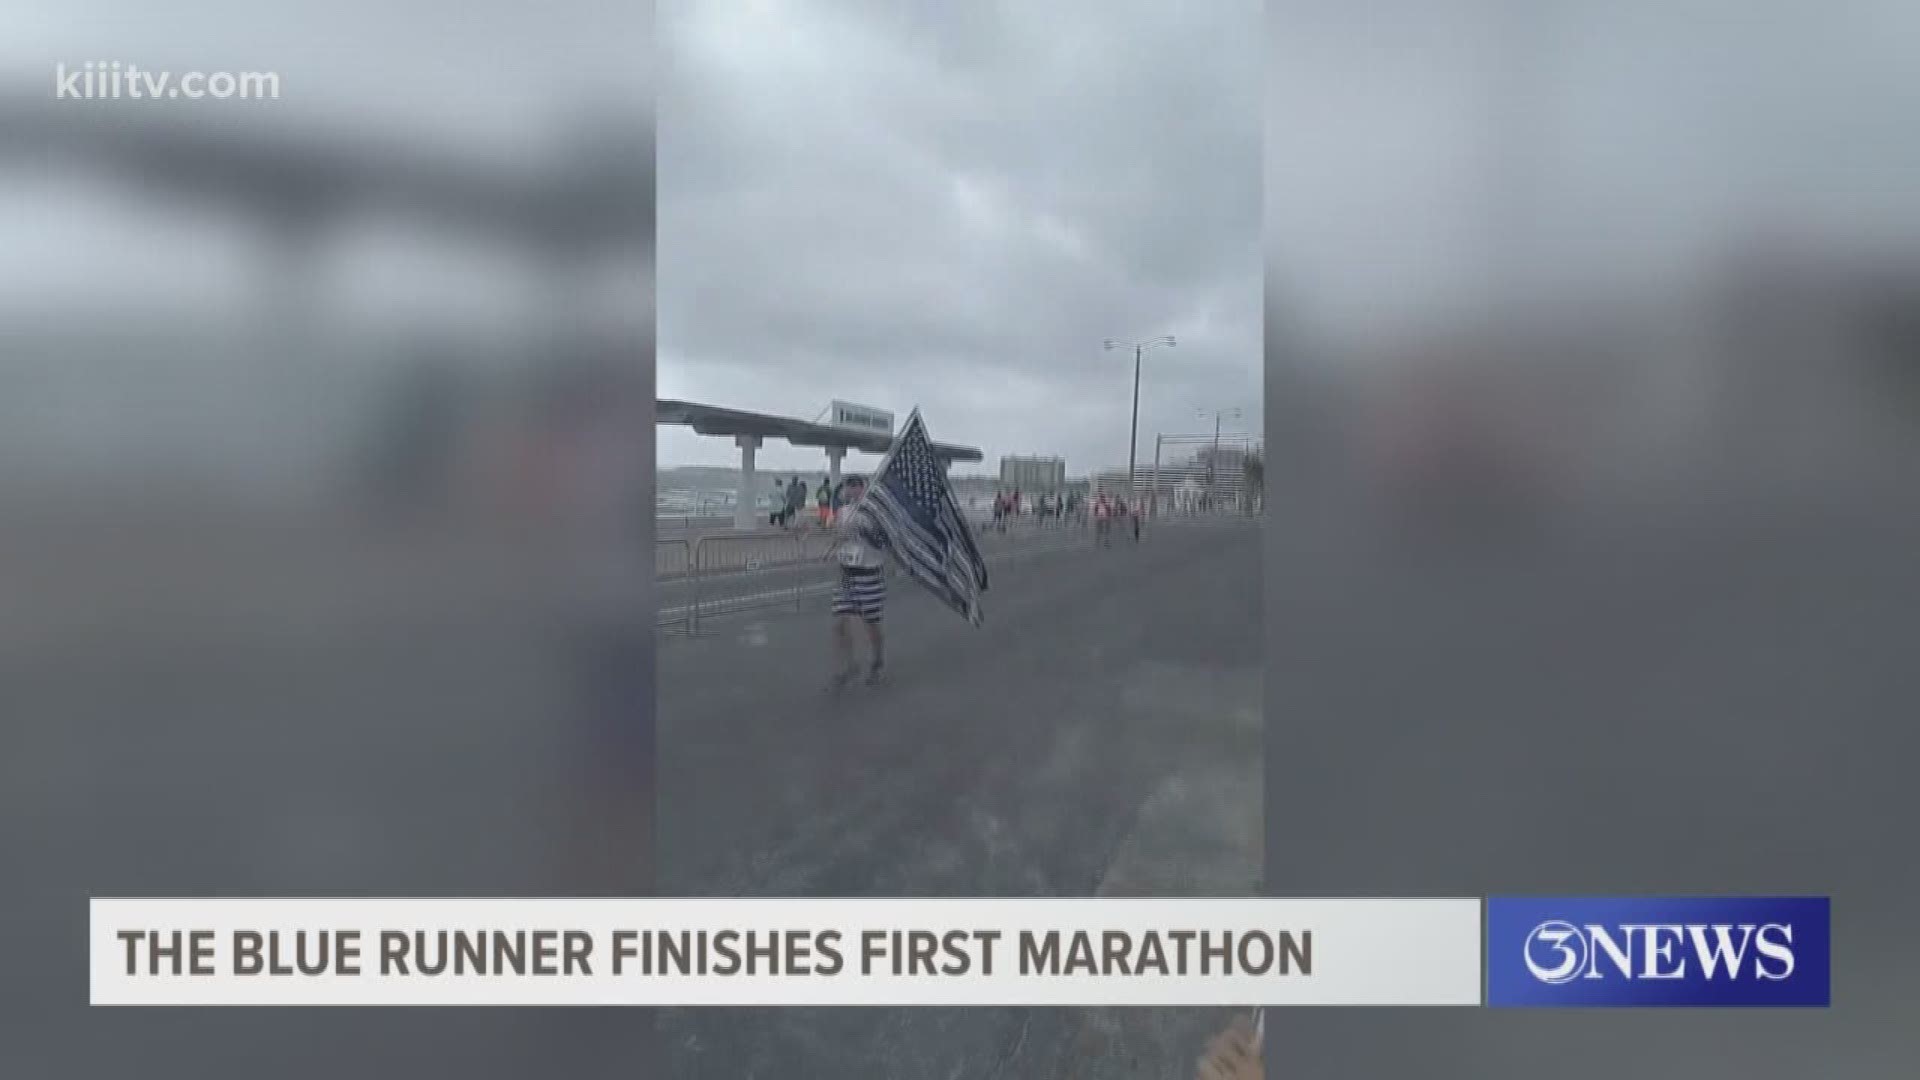 Joshua Taylor ran all 26.2 miles with his flag in hand.